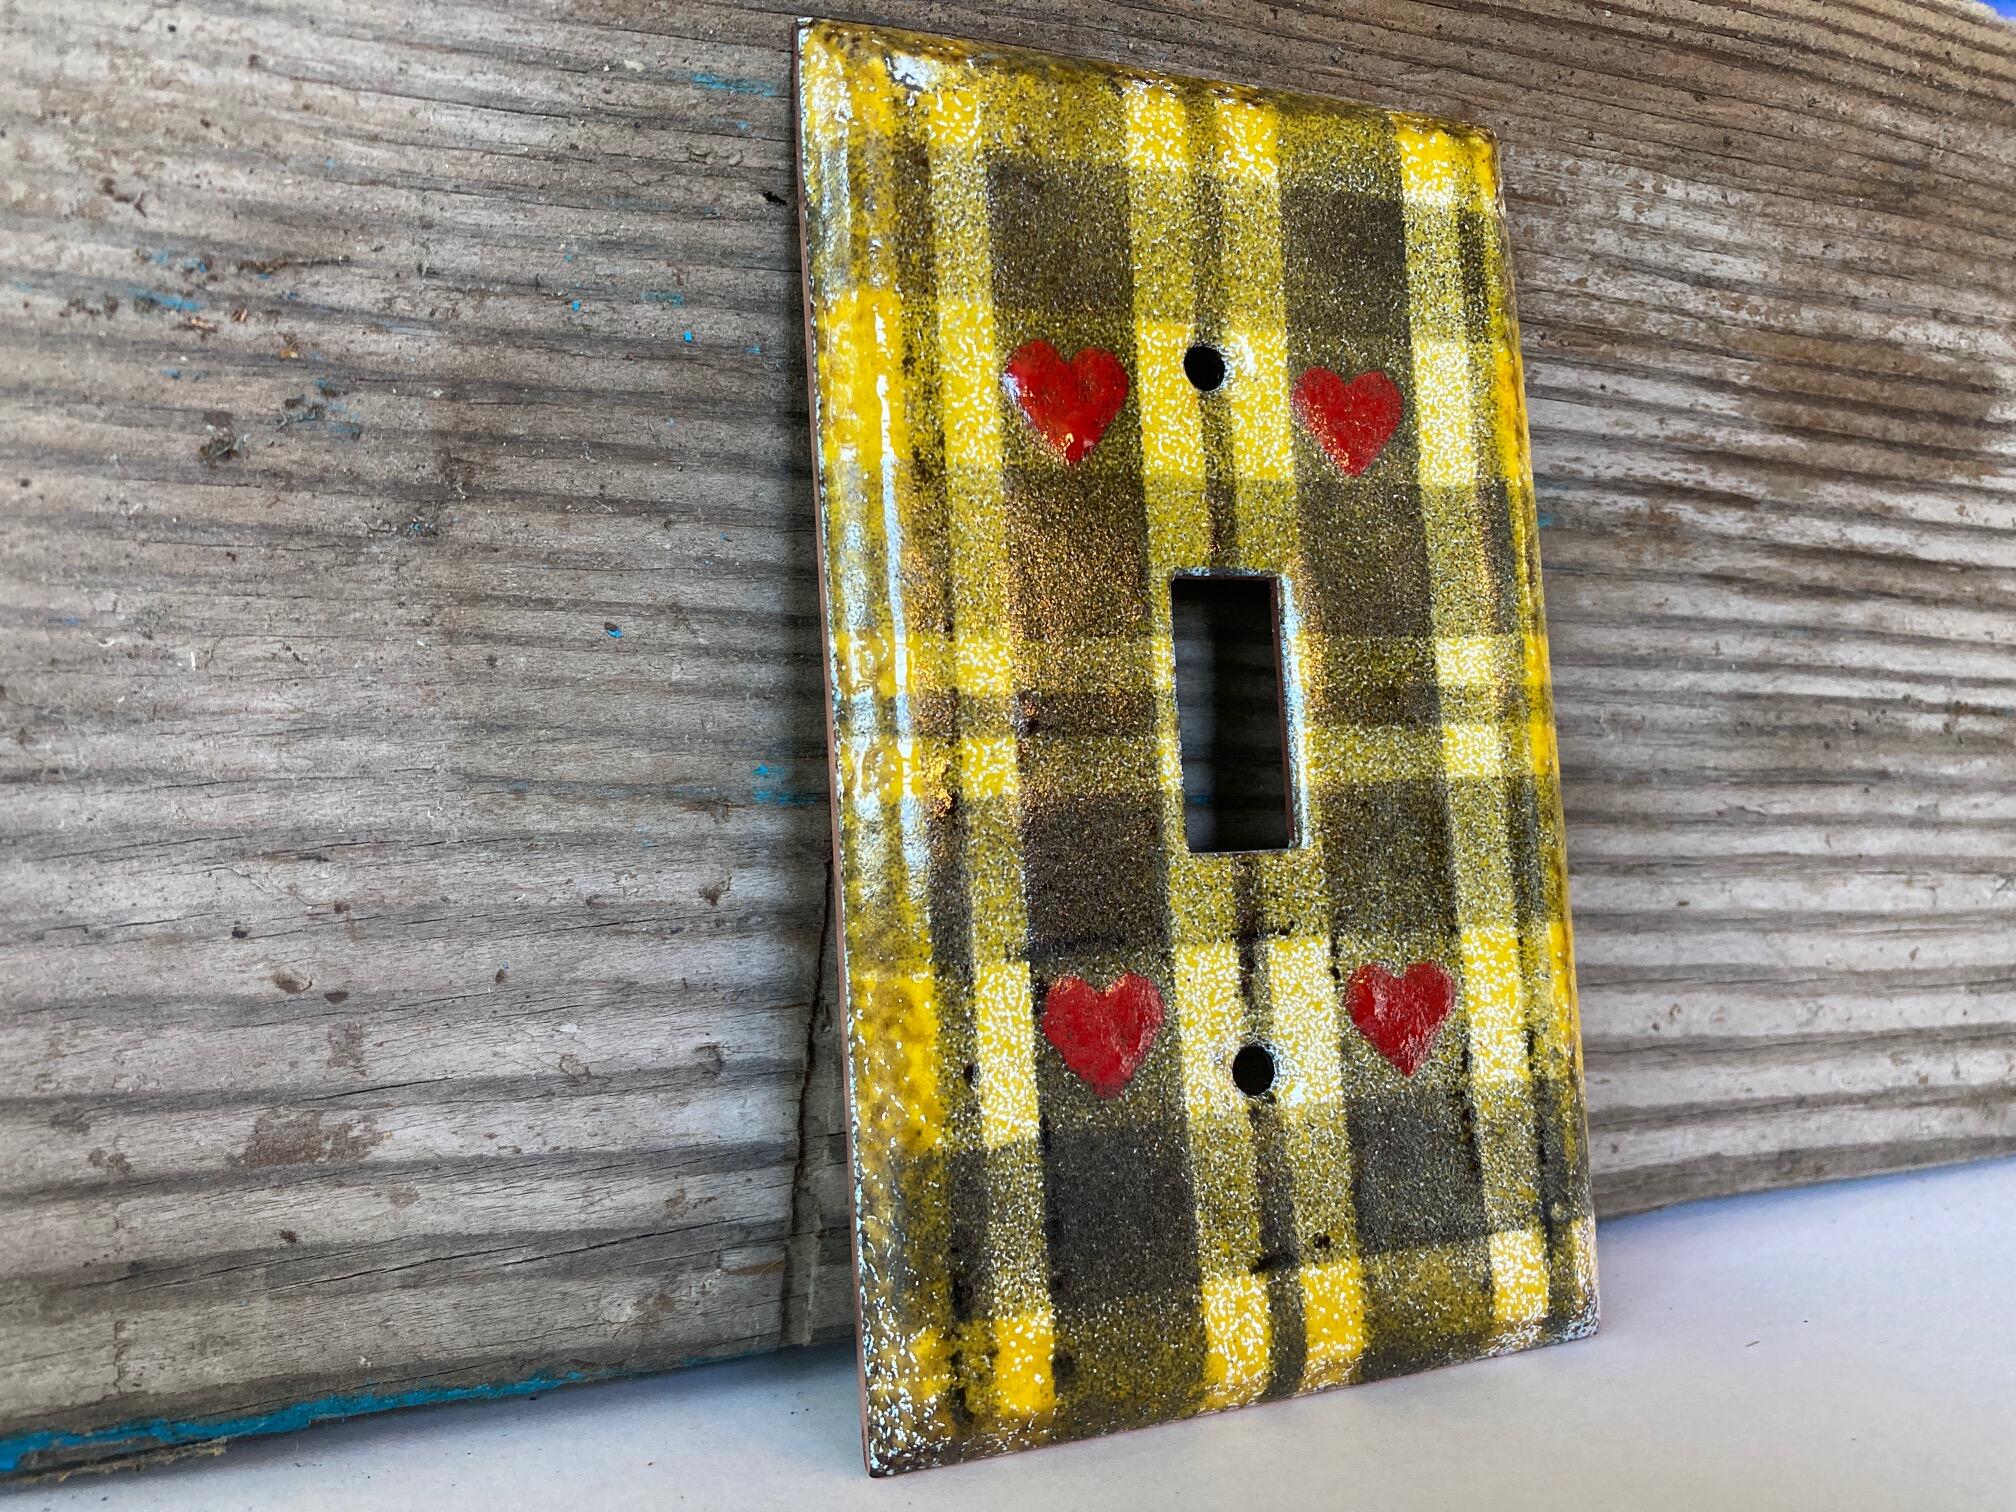 enameled copper single pole light switch cover plate shades of yellow and black plaid with red hearts